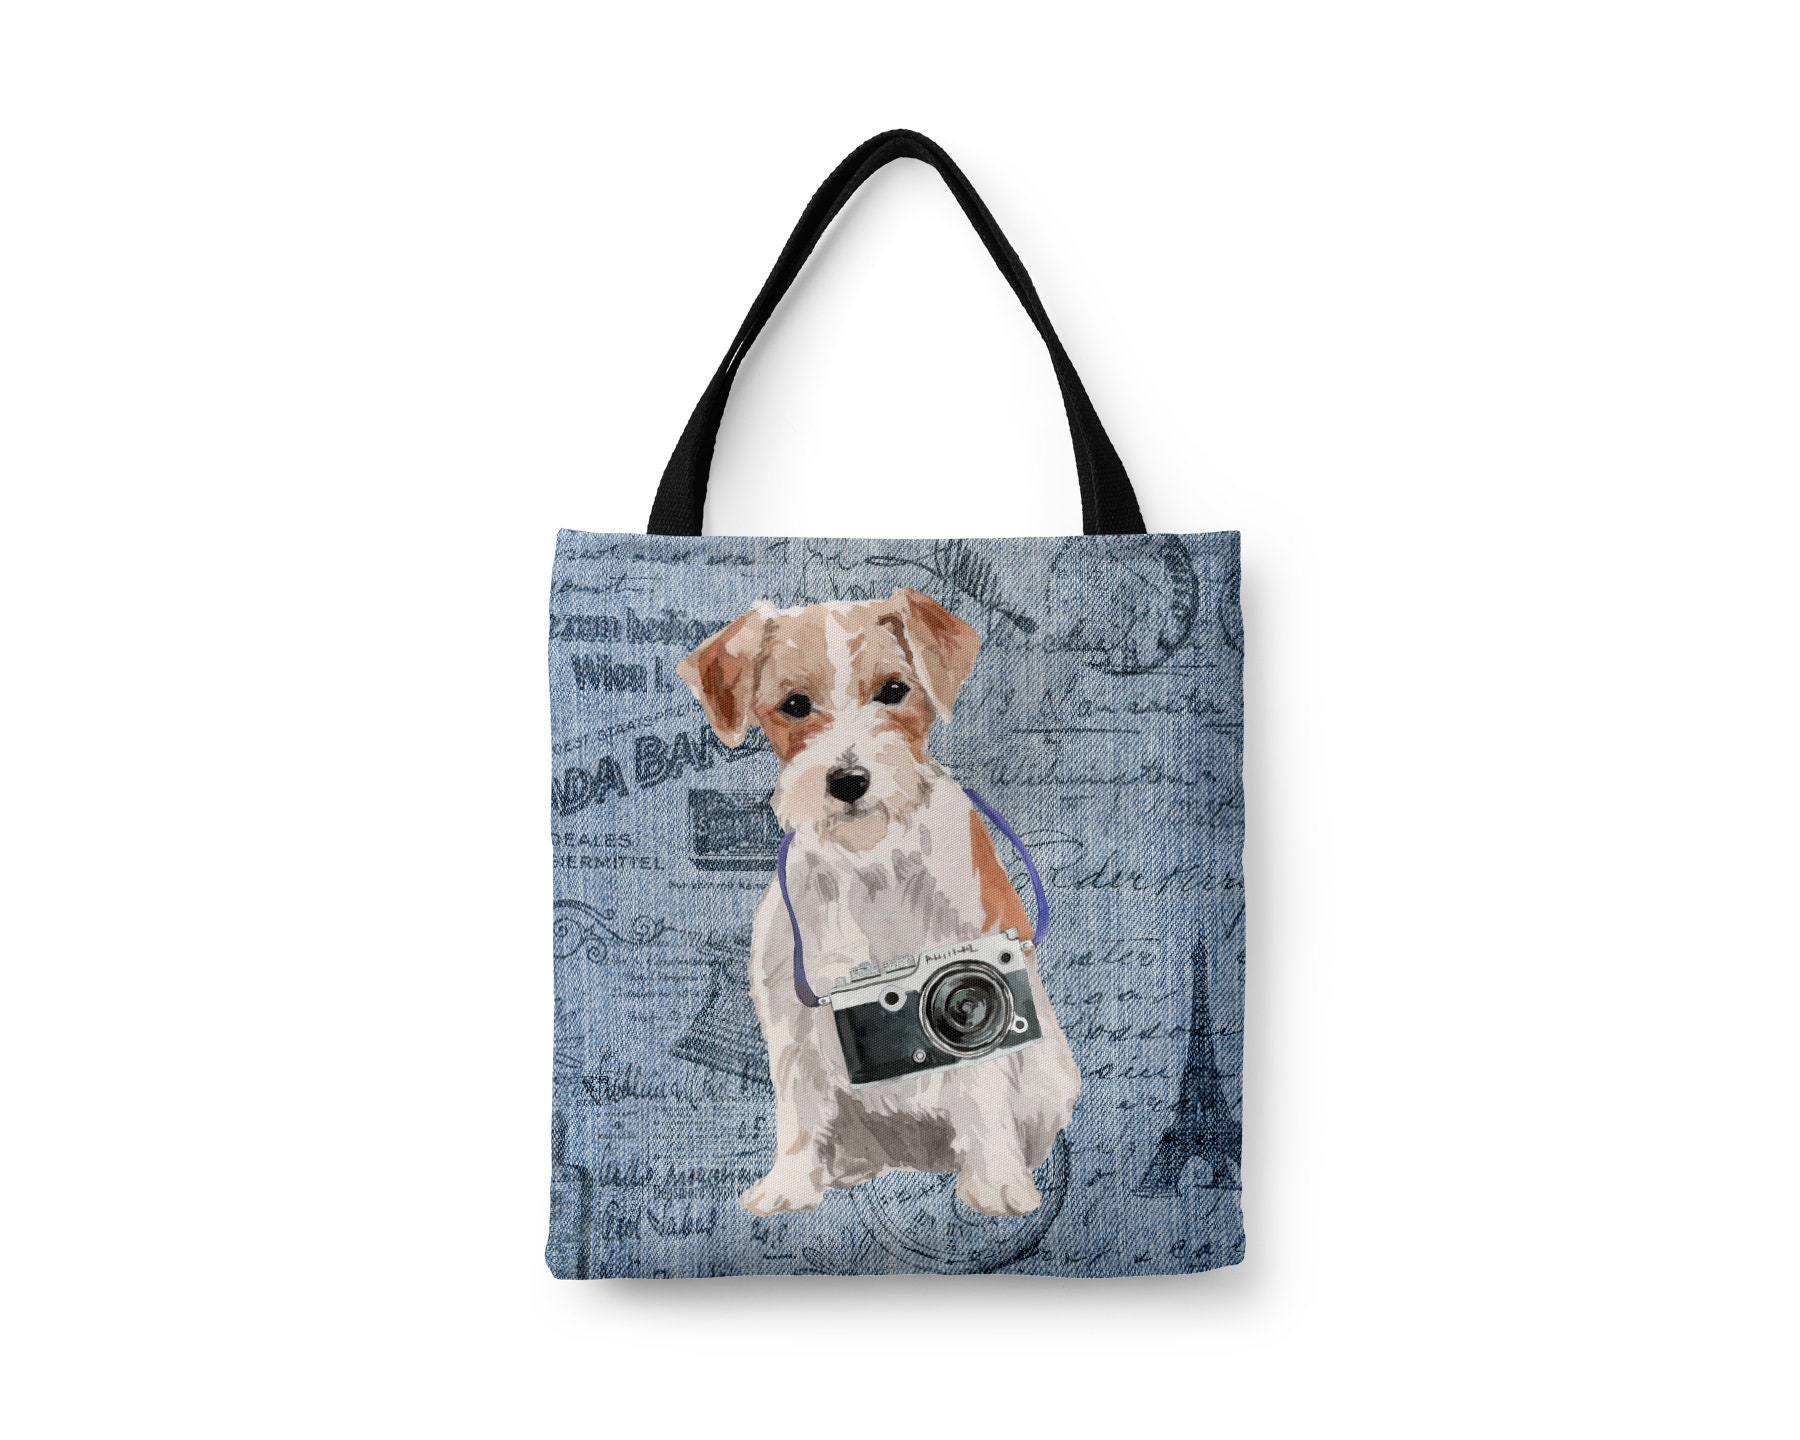 Jack Russell Terrier Dog Tote Bag Illustrated Dogs & 6 Denim Inspired Styles. All Purpose Ideal For Shopping, Laptop. Jrt